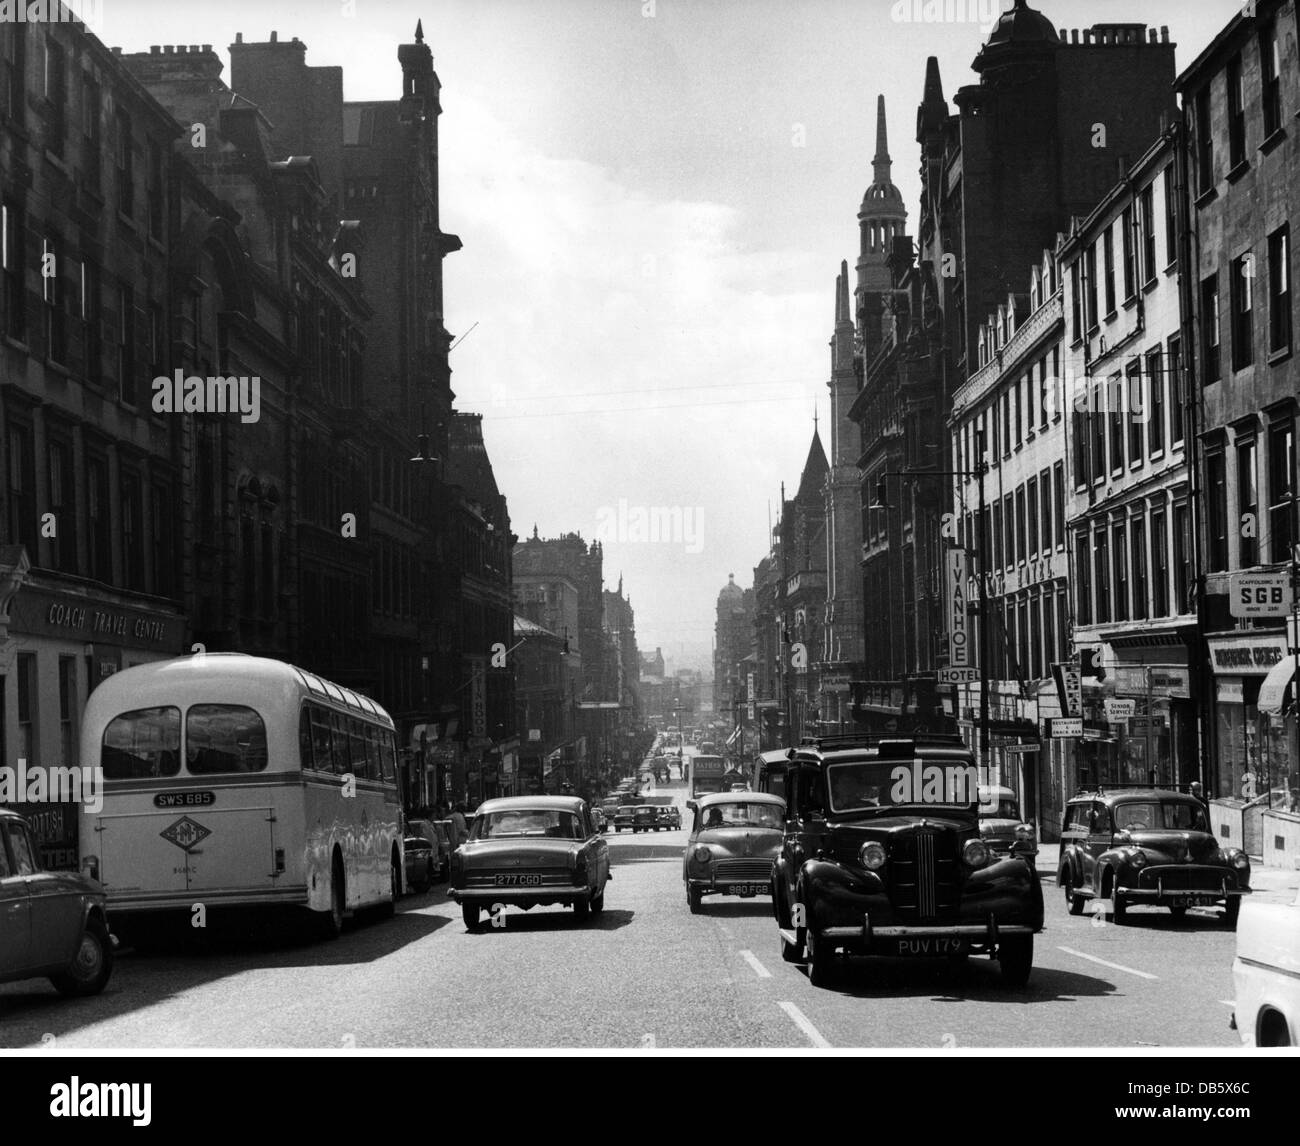 geography / travel, Great Britain, Glasgow, street scenes, 1960s, 60s, 20th century, historic, historical, Western Europe, Scotland, car, cars, transport, transportation, street scene, street scenes, pedestrian, pedestrians, passer-by, passerby, passers-by, inner city, midtown, city centre, town centre, urban core, people, Additional-Rights-Clearences-Not Available Stock Photo